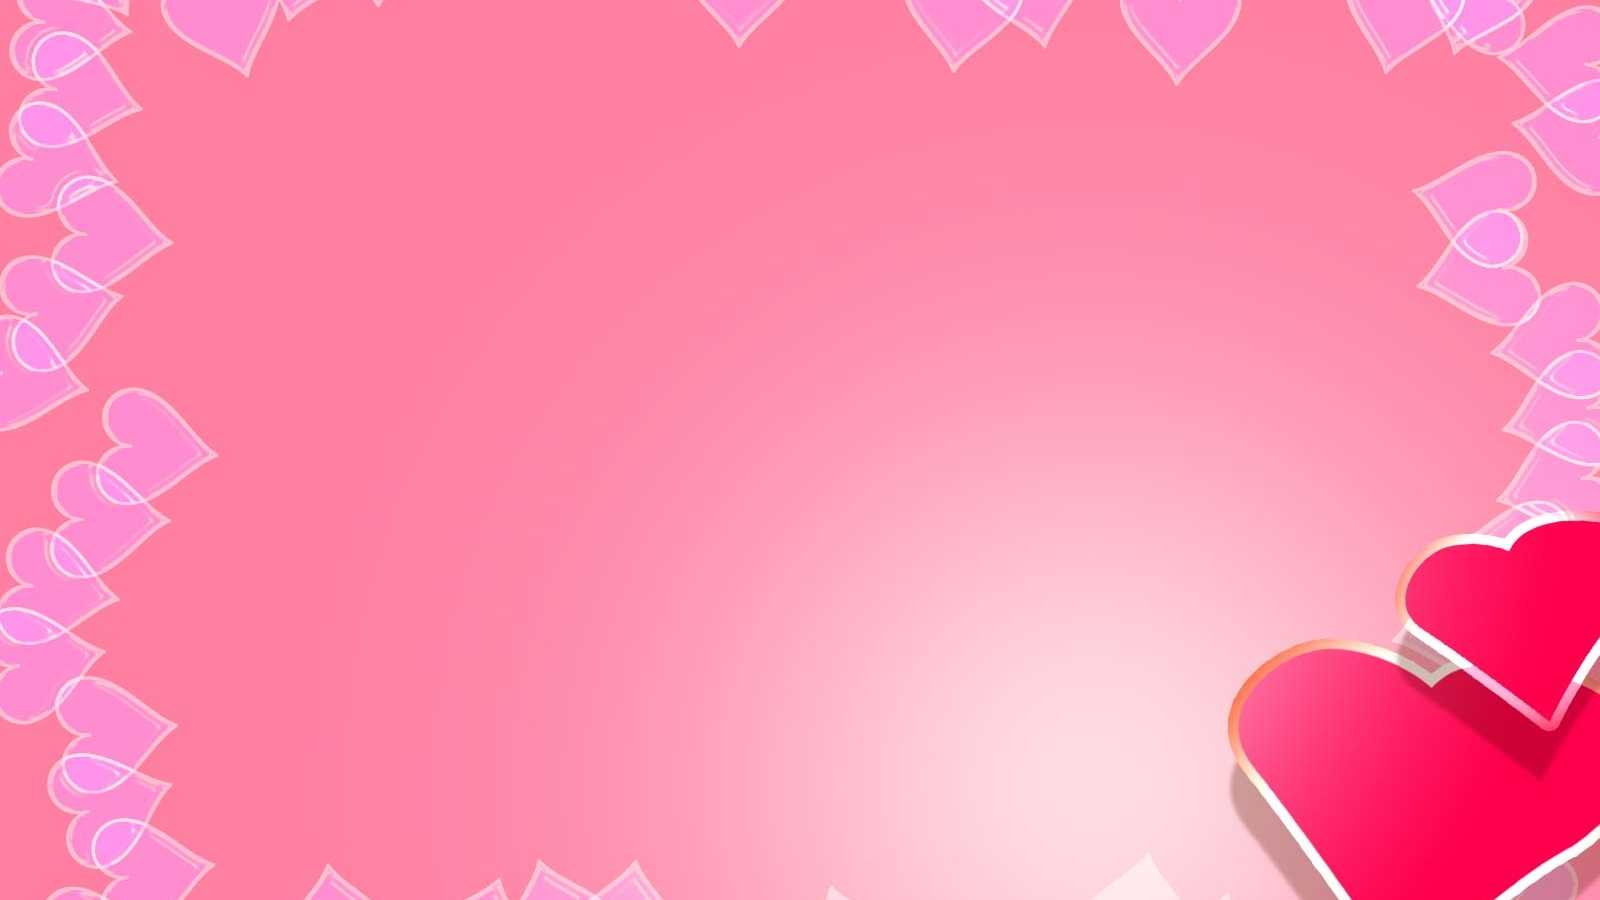 Free Download Valentine Backgrounds For Powerpoint Border With Valentine Powerpoint Templates Free